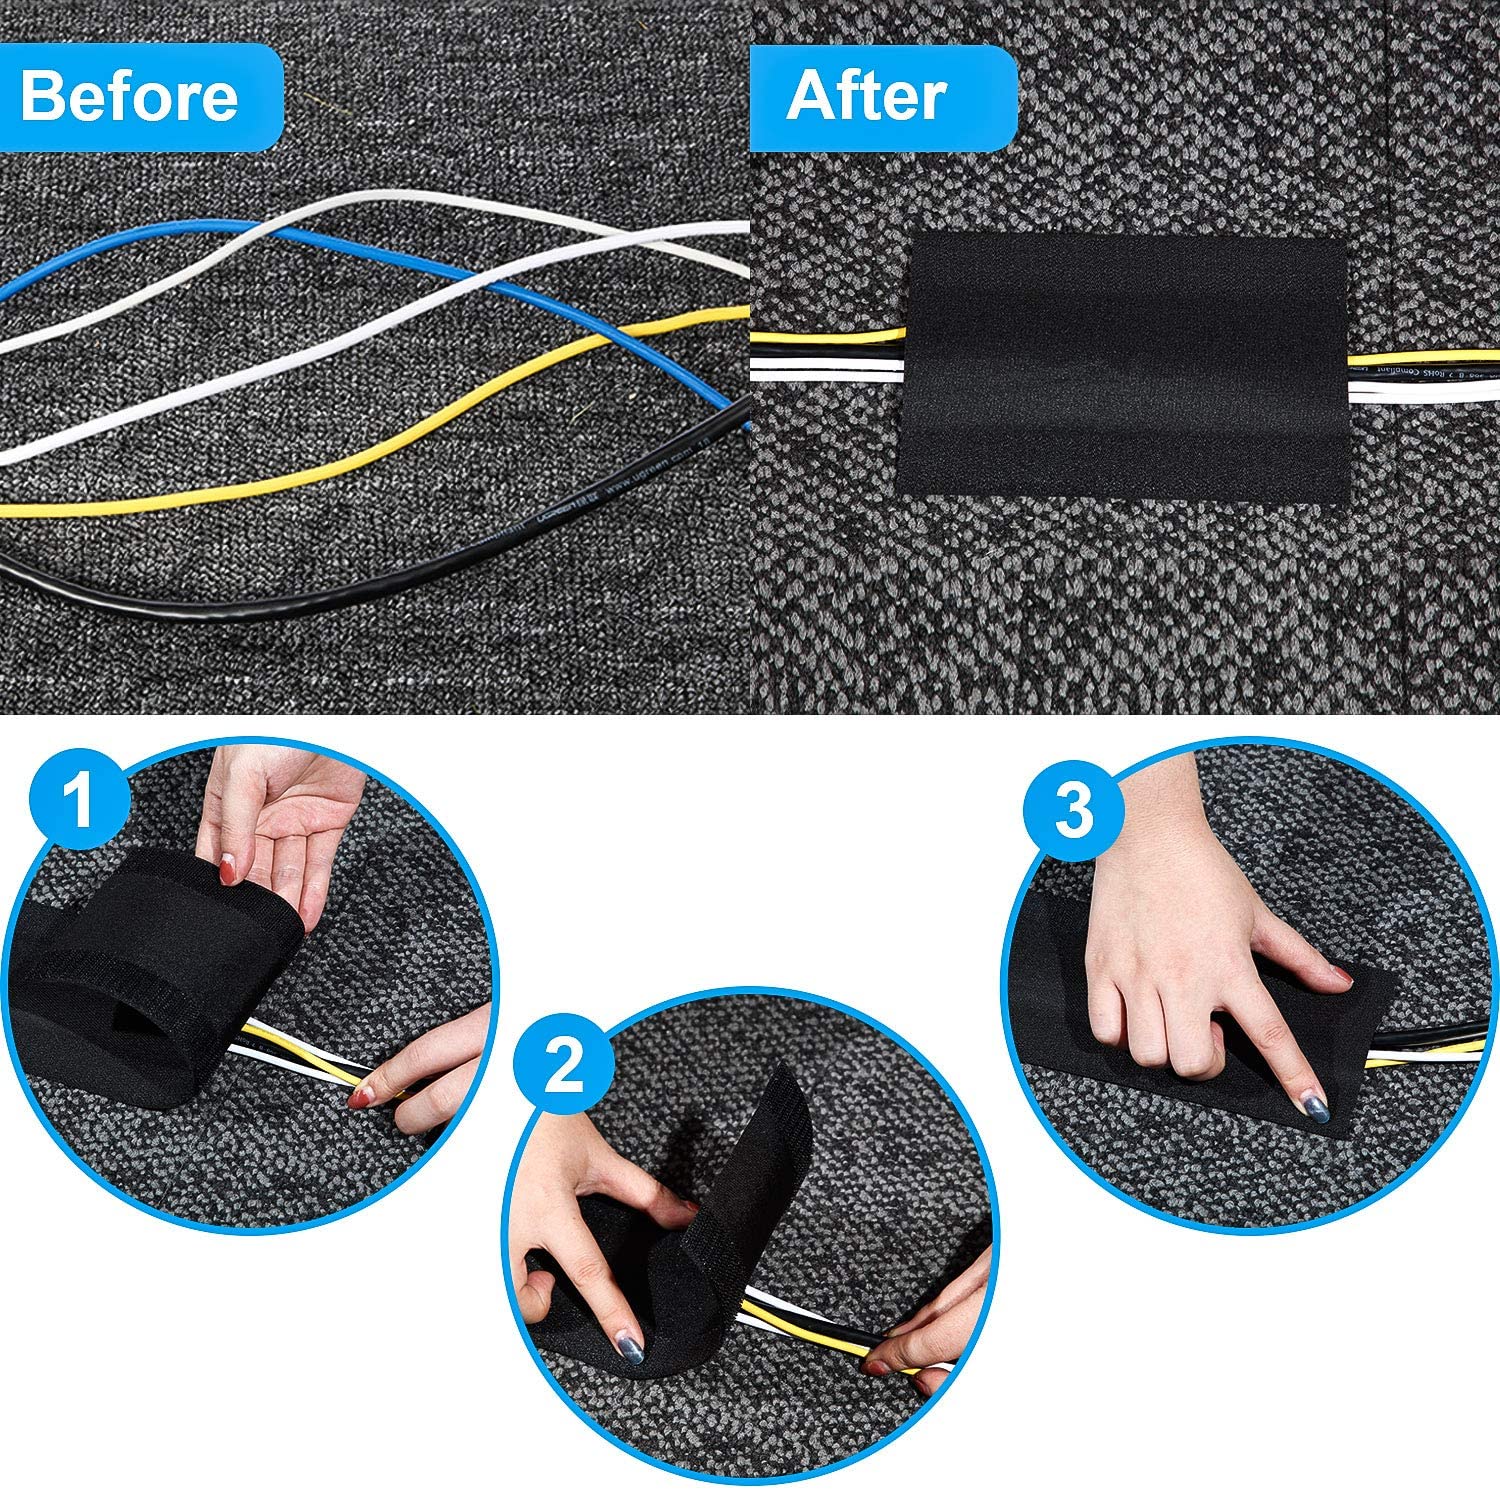 Carpet cord cover sleeving